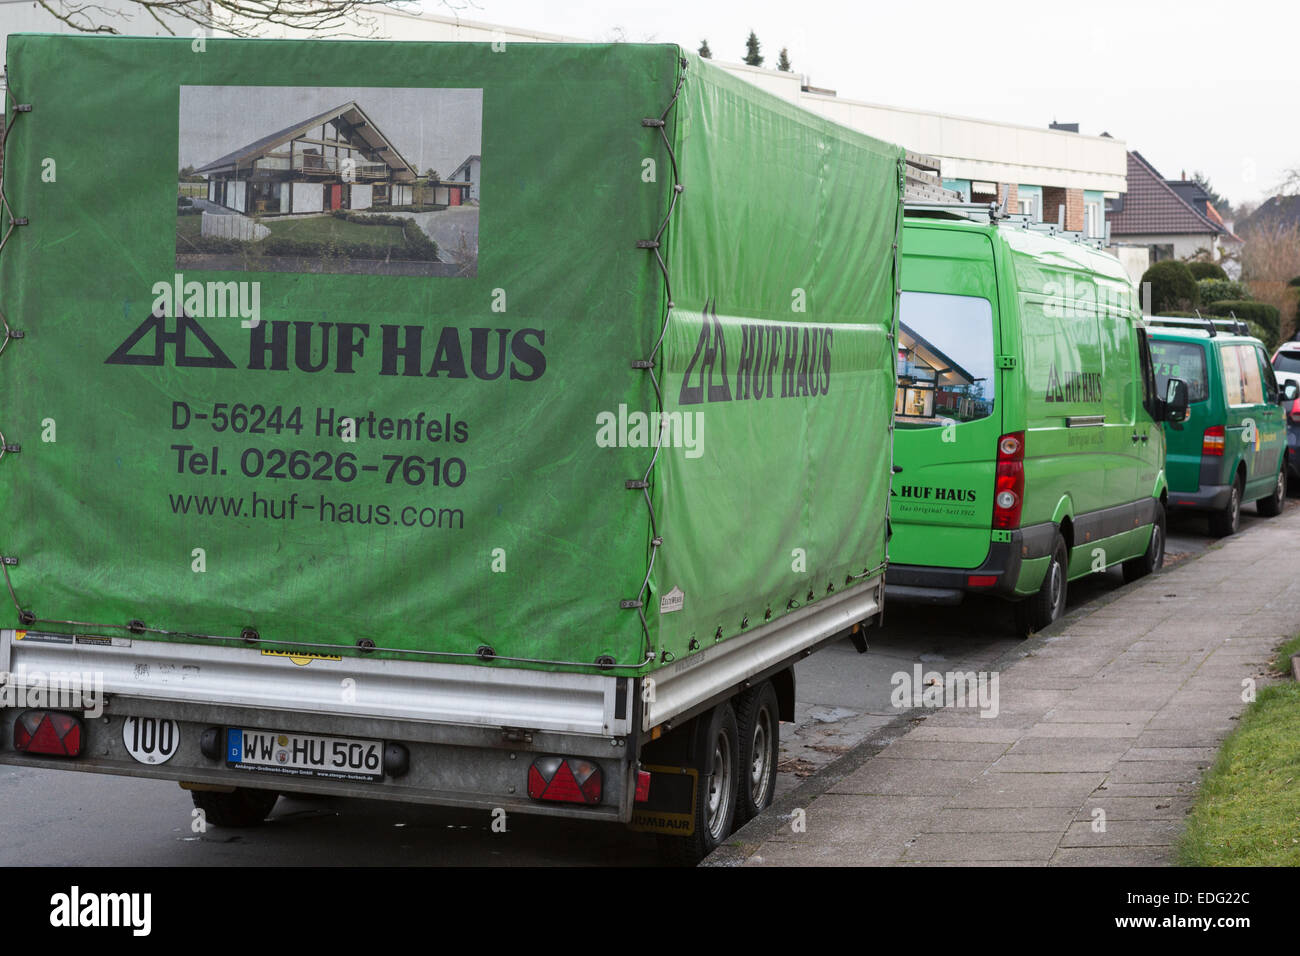 Huf Haus pre-fabricated building vans in a street Germany Stock Photo -  Alamy